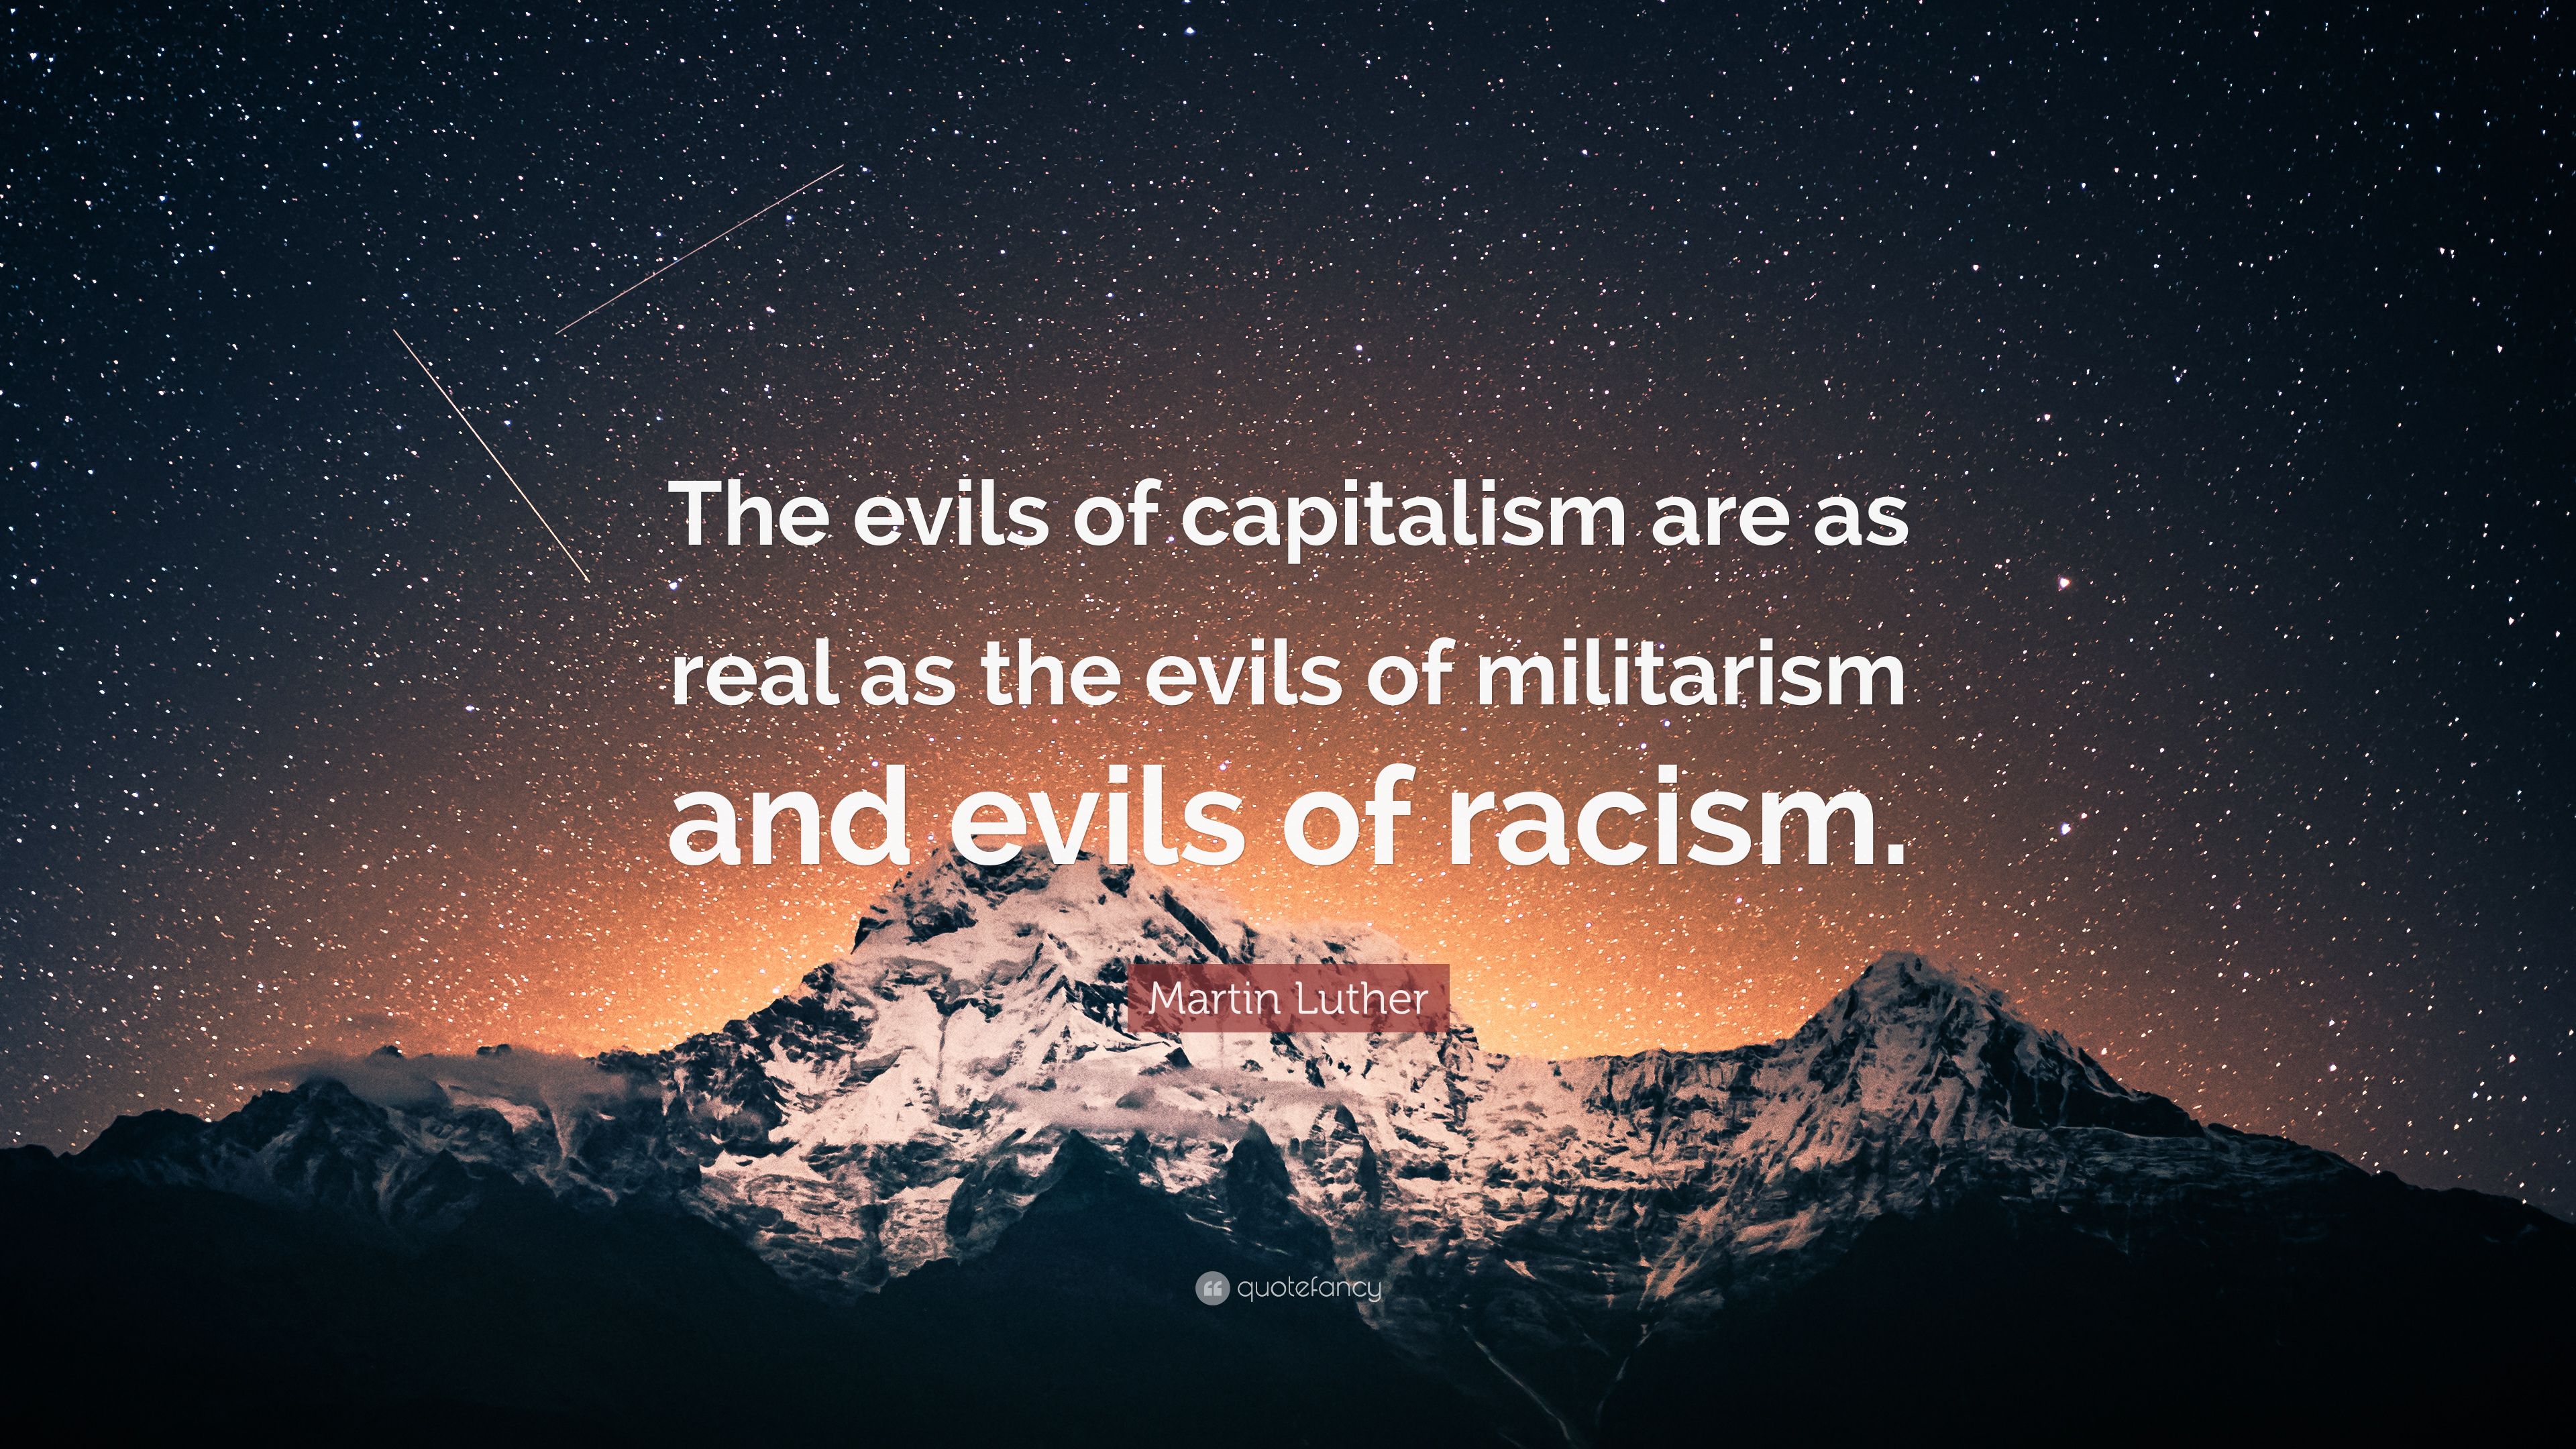 Martin Luther Quote: “The evils of capitalism are as real as